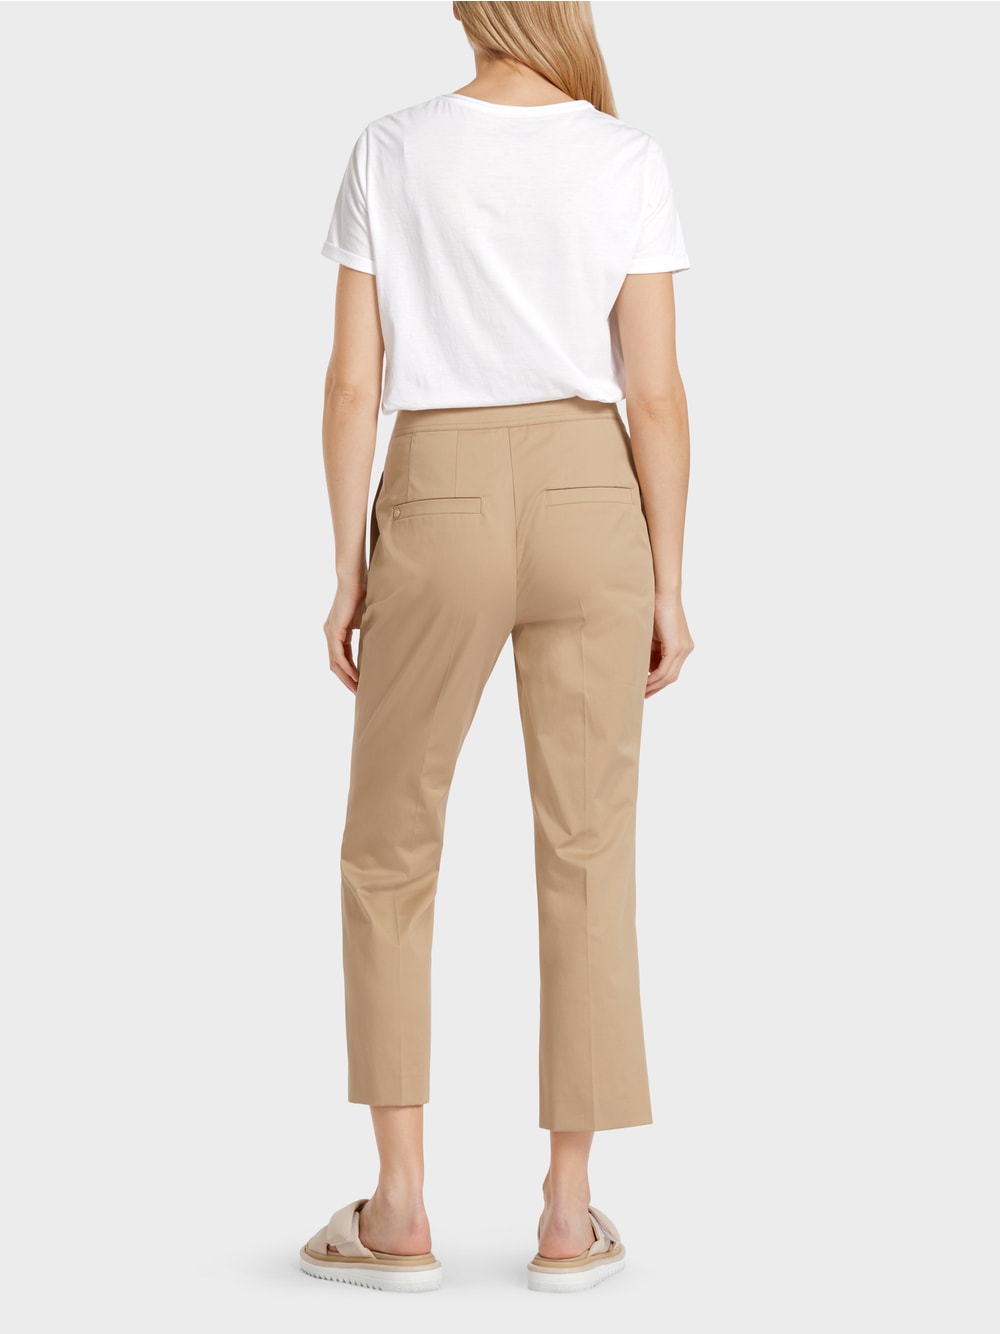 Marc Cain Beige Chino-style pants